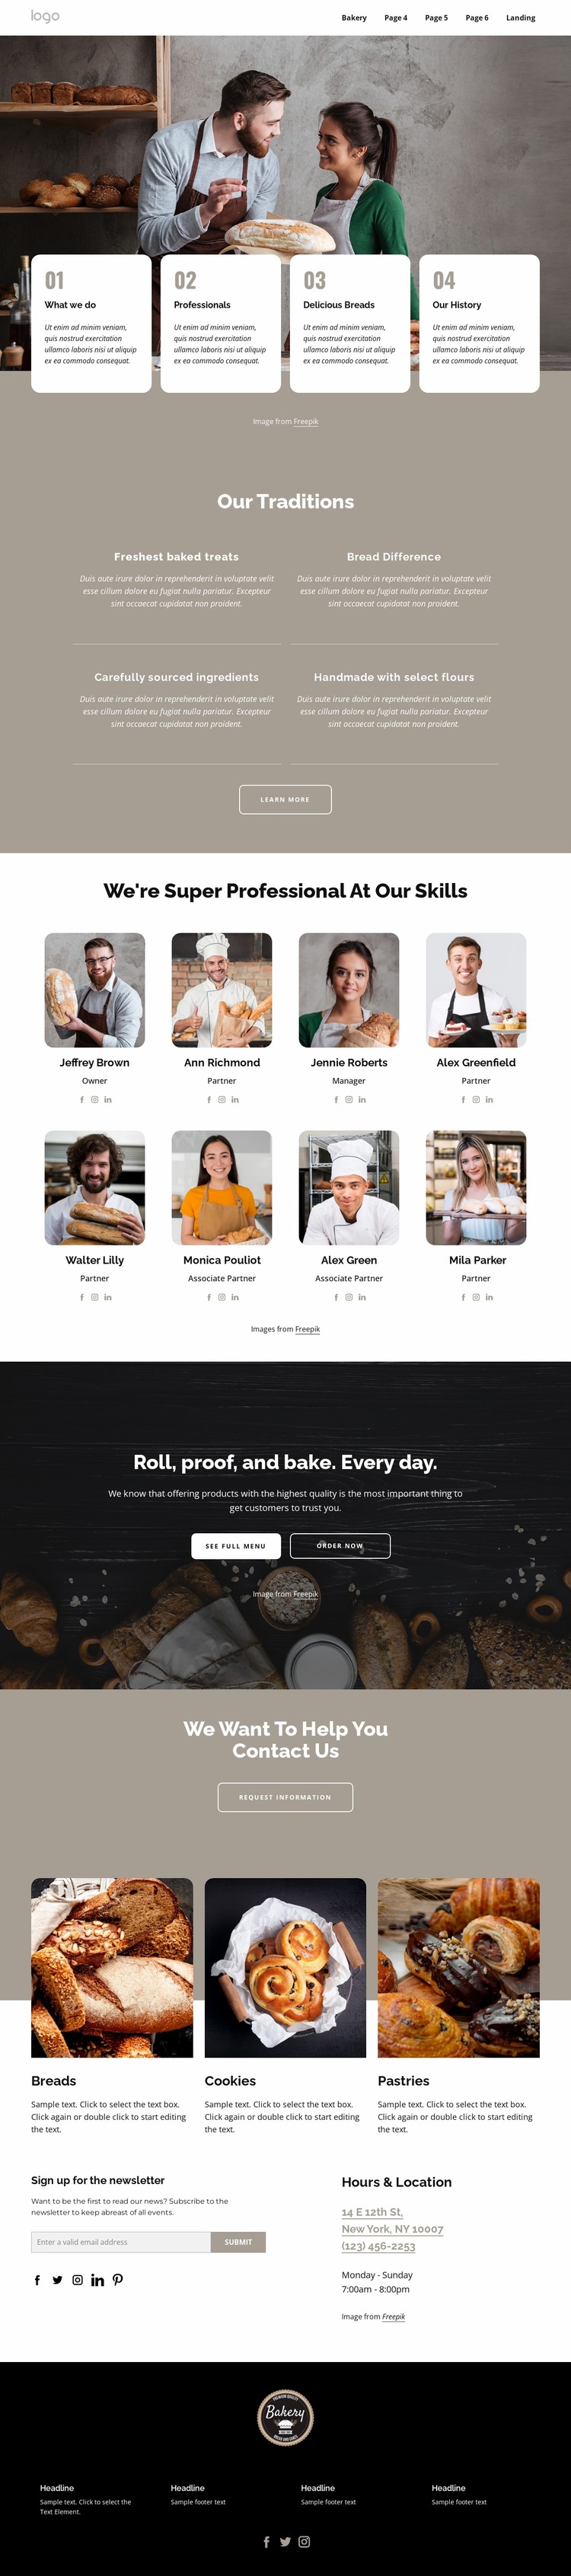 We are professional bakers Website Mockup